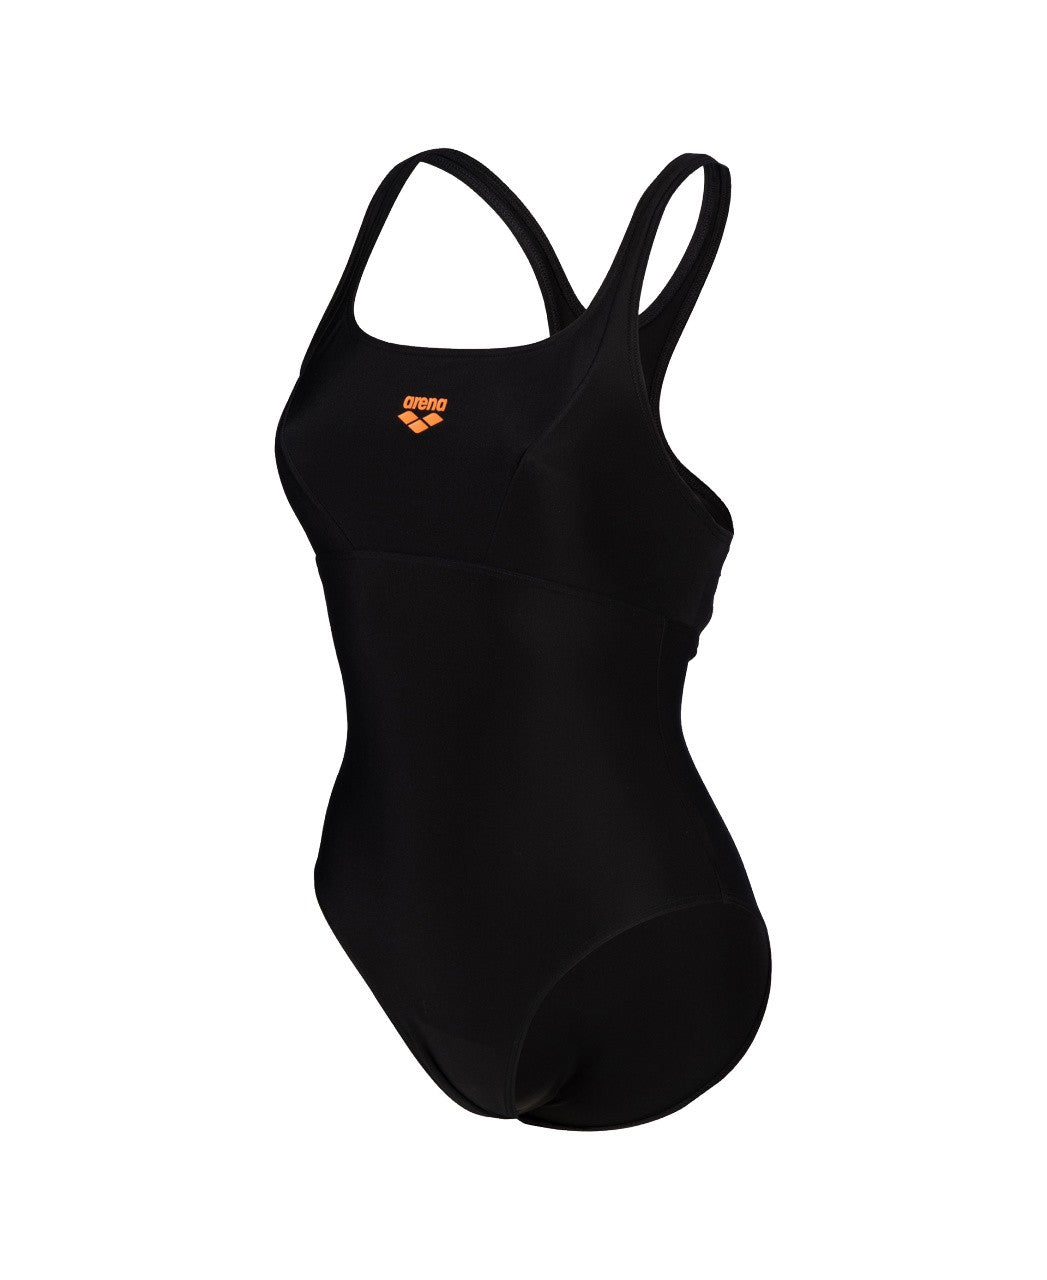 W Solid Swimsuit Control Pro Back B black